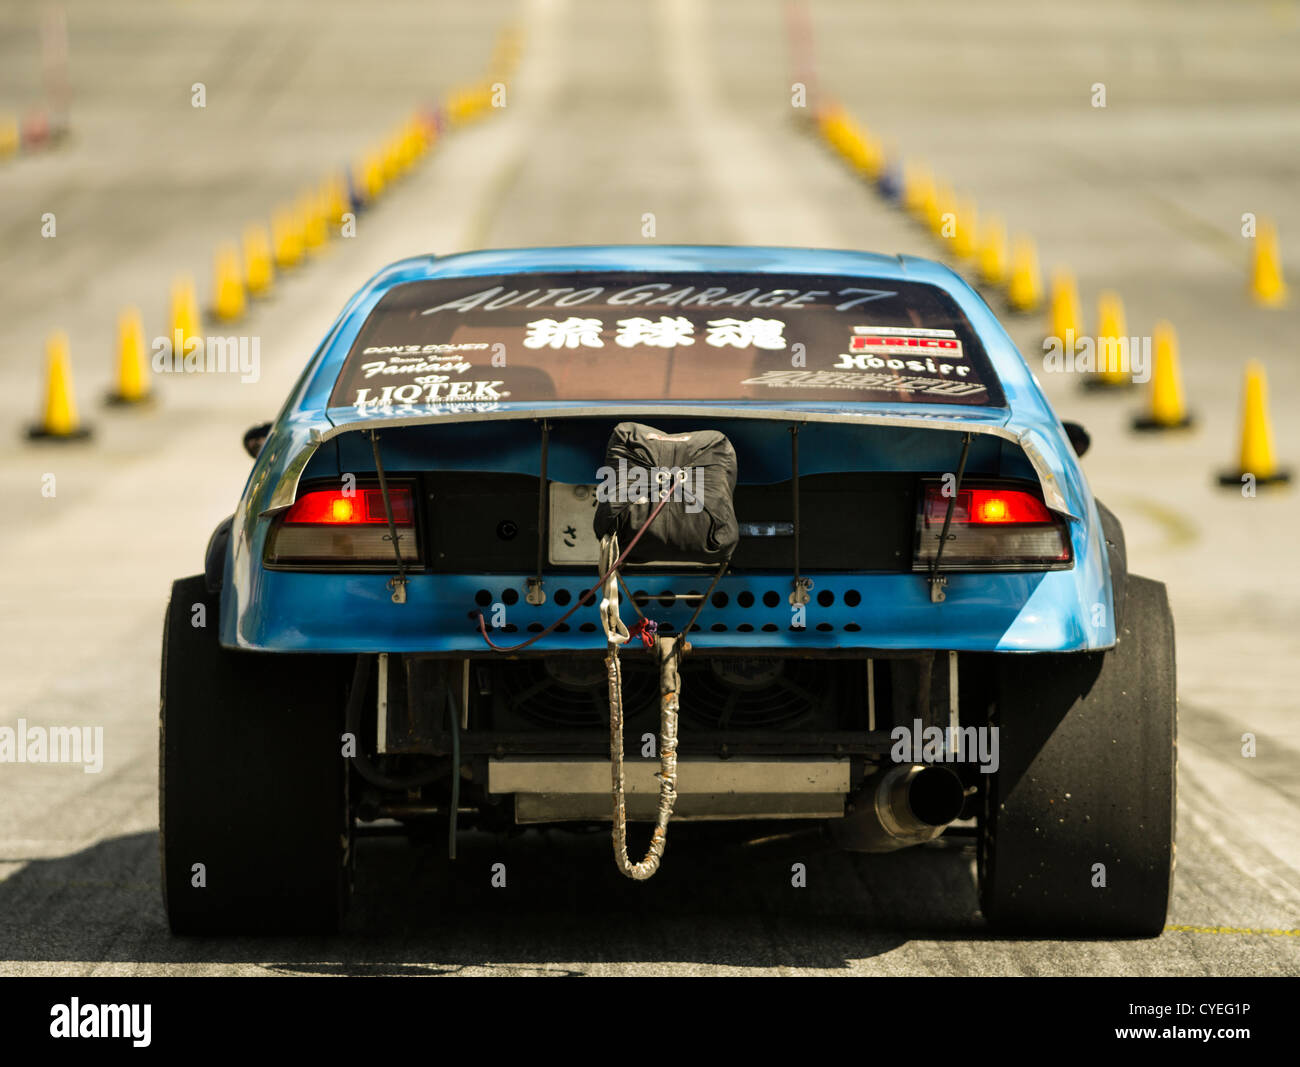 Japanese Drag Racing car with rear parachute for breaking and extra wide tires Stock Photo